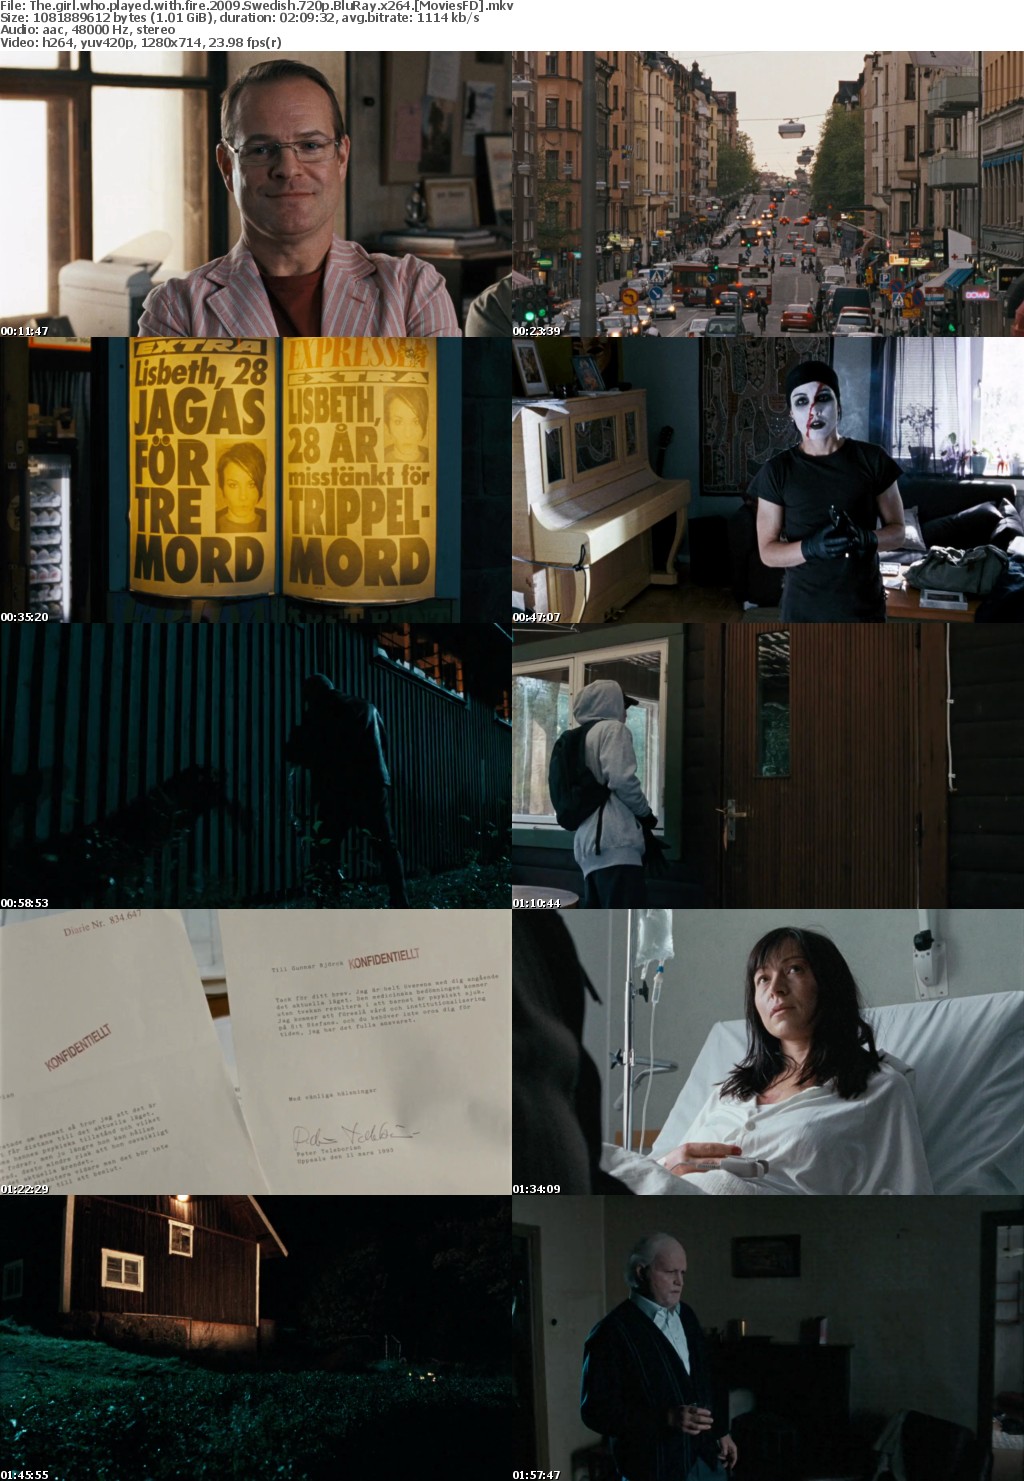 The Girl Who Played With Fire (2009) Swedish 720p BluRay x264 - MoviesFD